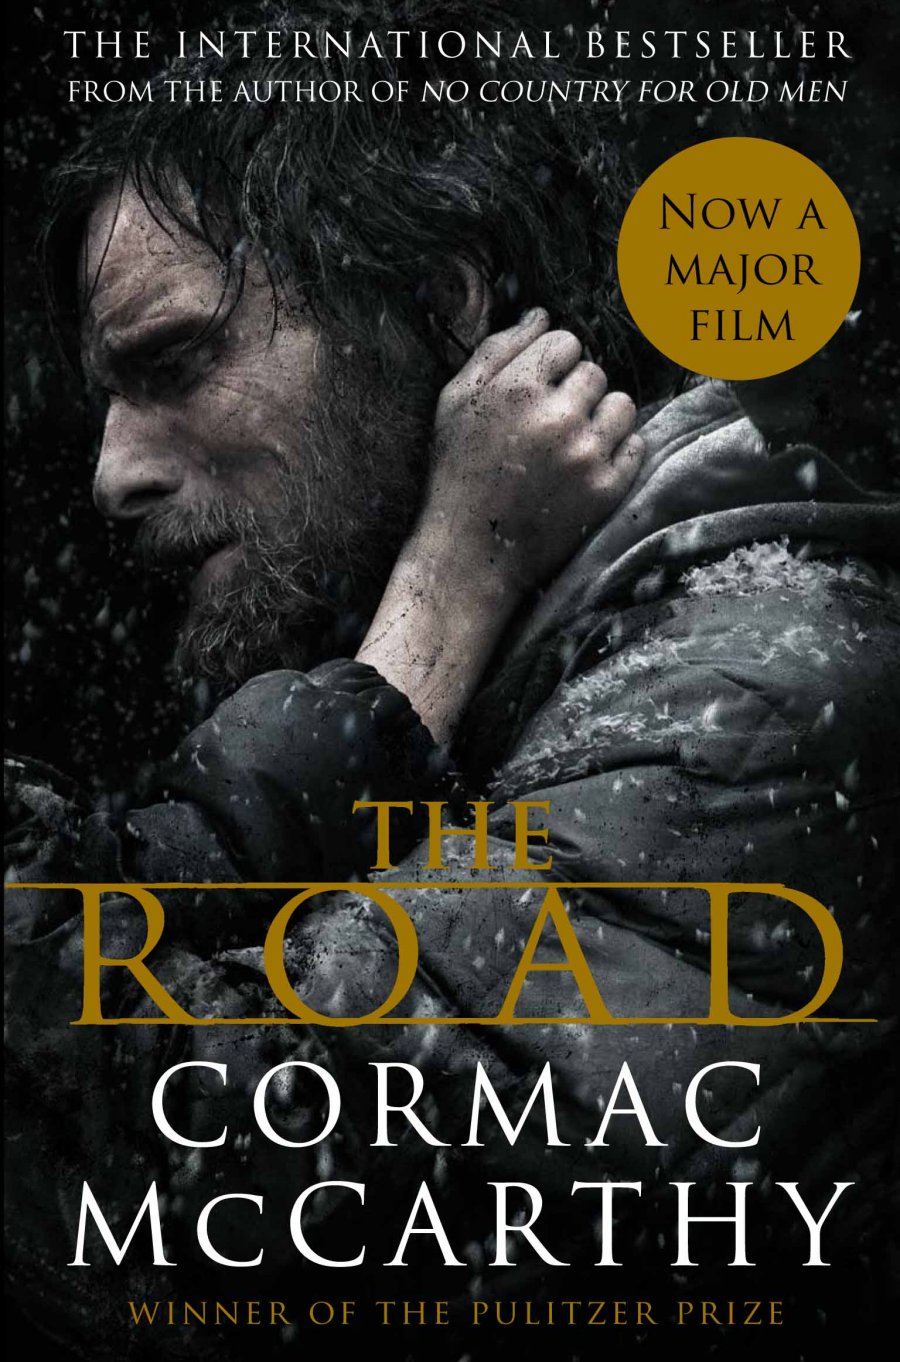 Death In Cormac Mccarthys The Road